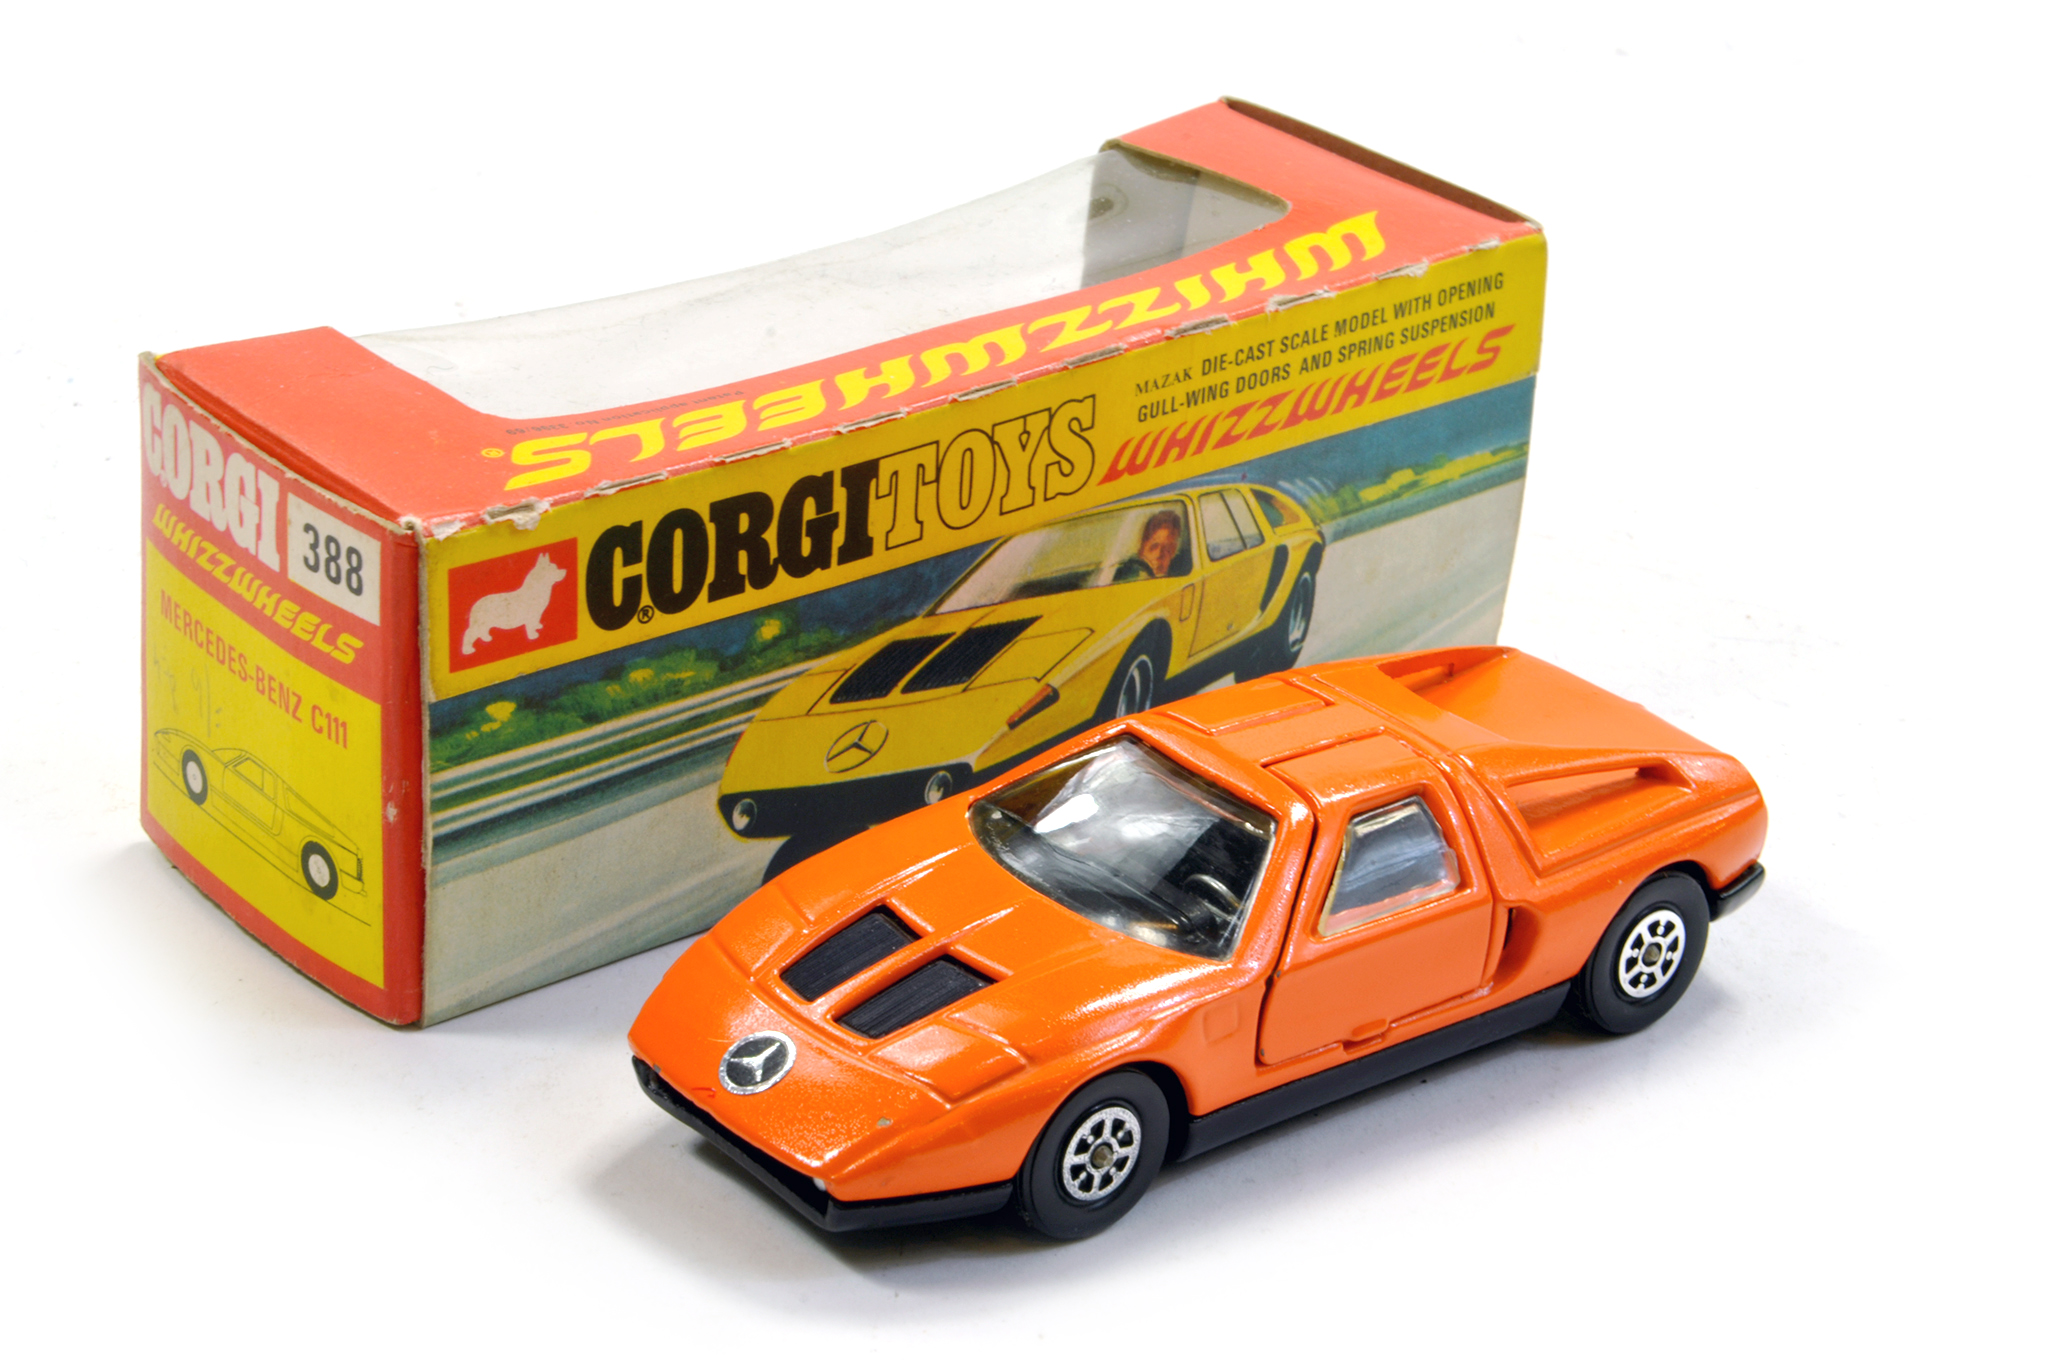 Corgi Whizzwheels No. 388 Mercedes C111 with orange body. Excellent to Near Mint in Excellent Box.